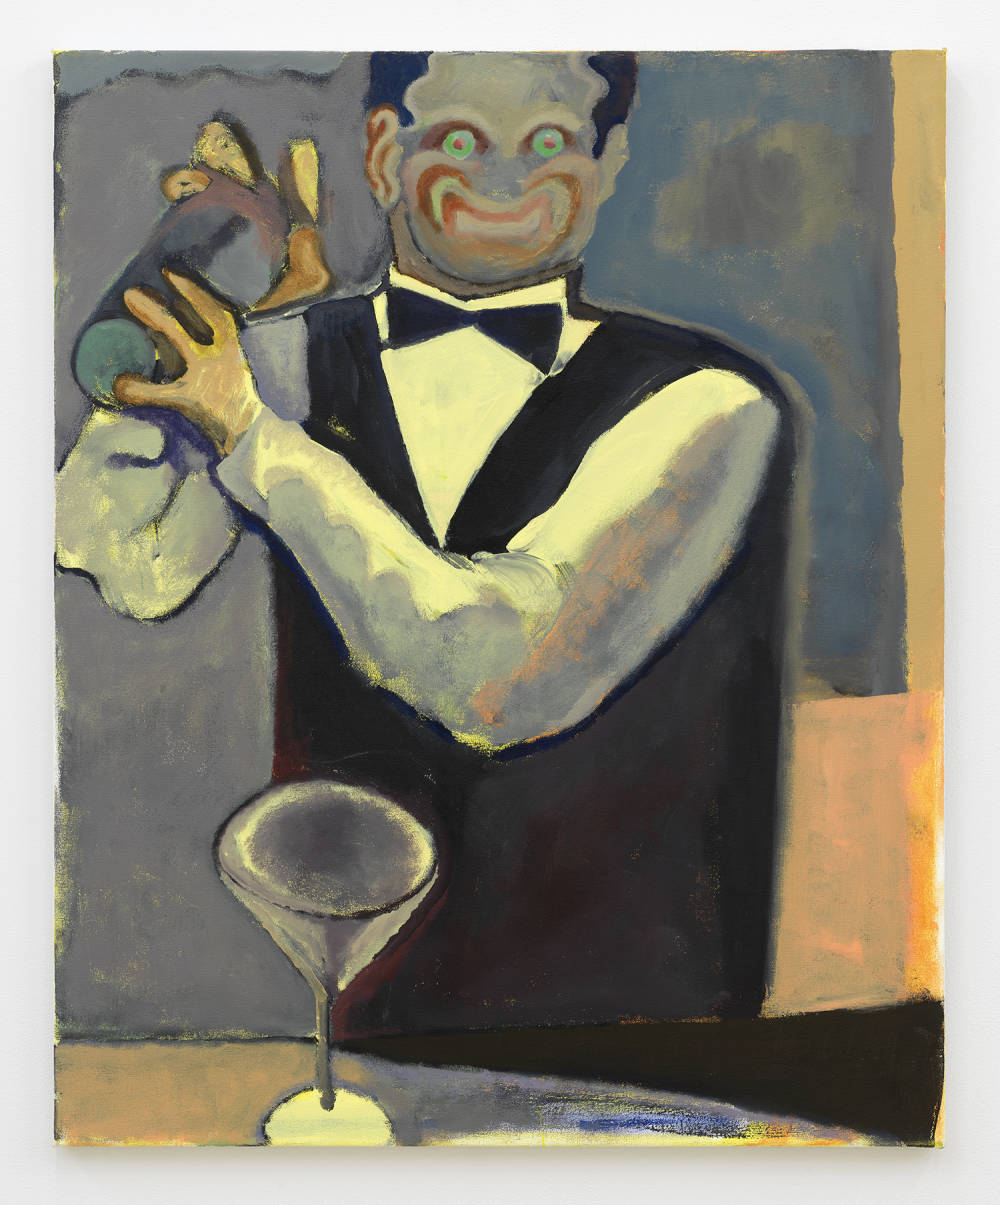 An abstracted painting of a bartender shaking a drink in front of a martini glass. The figure has a clown-face expression. The palette is primarily neon colors and shades of black. 